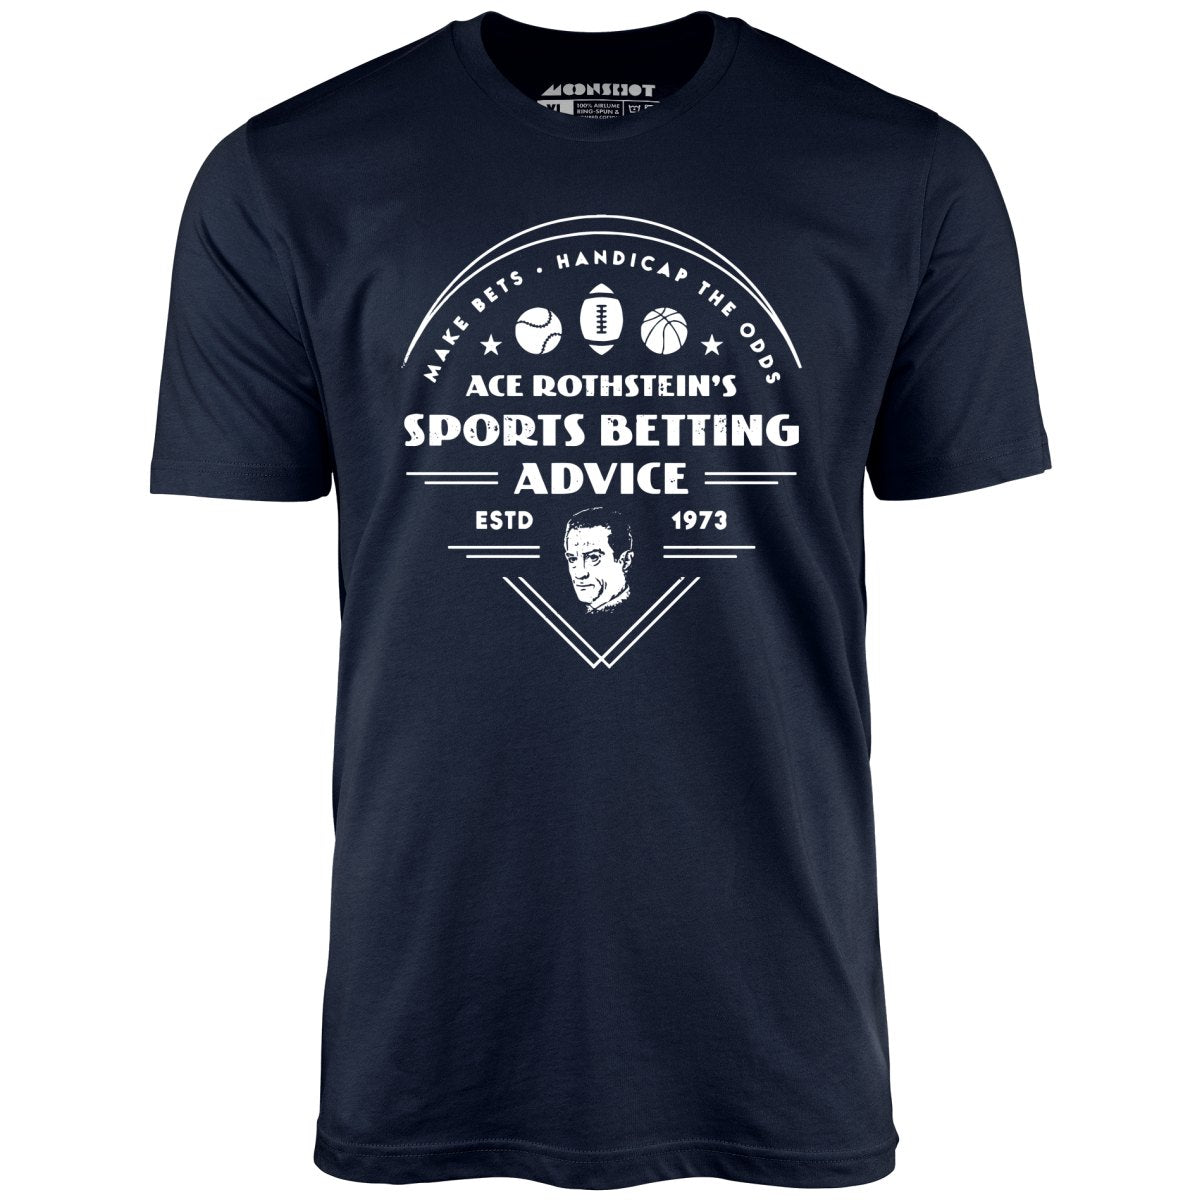 Ace Rothstein's Sports Betting Advice - Unisex T-Shirt